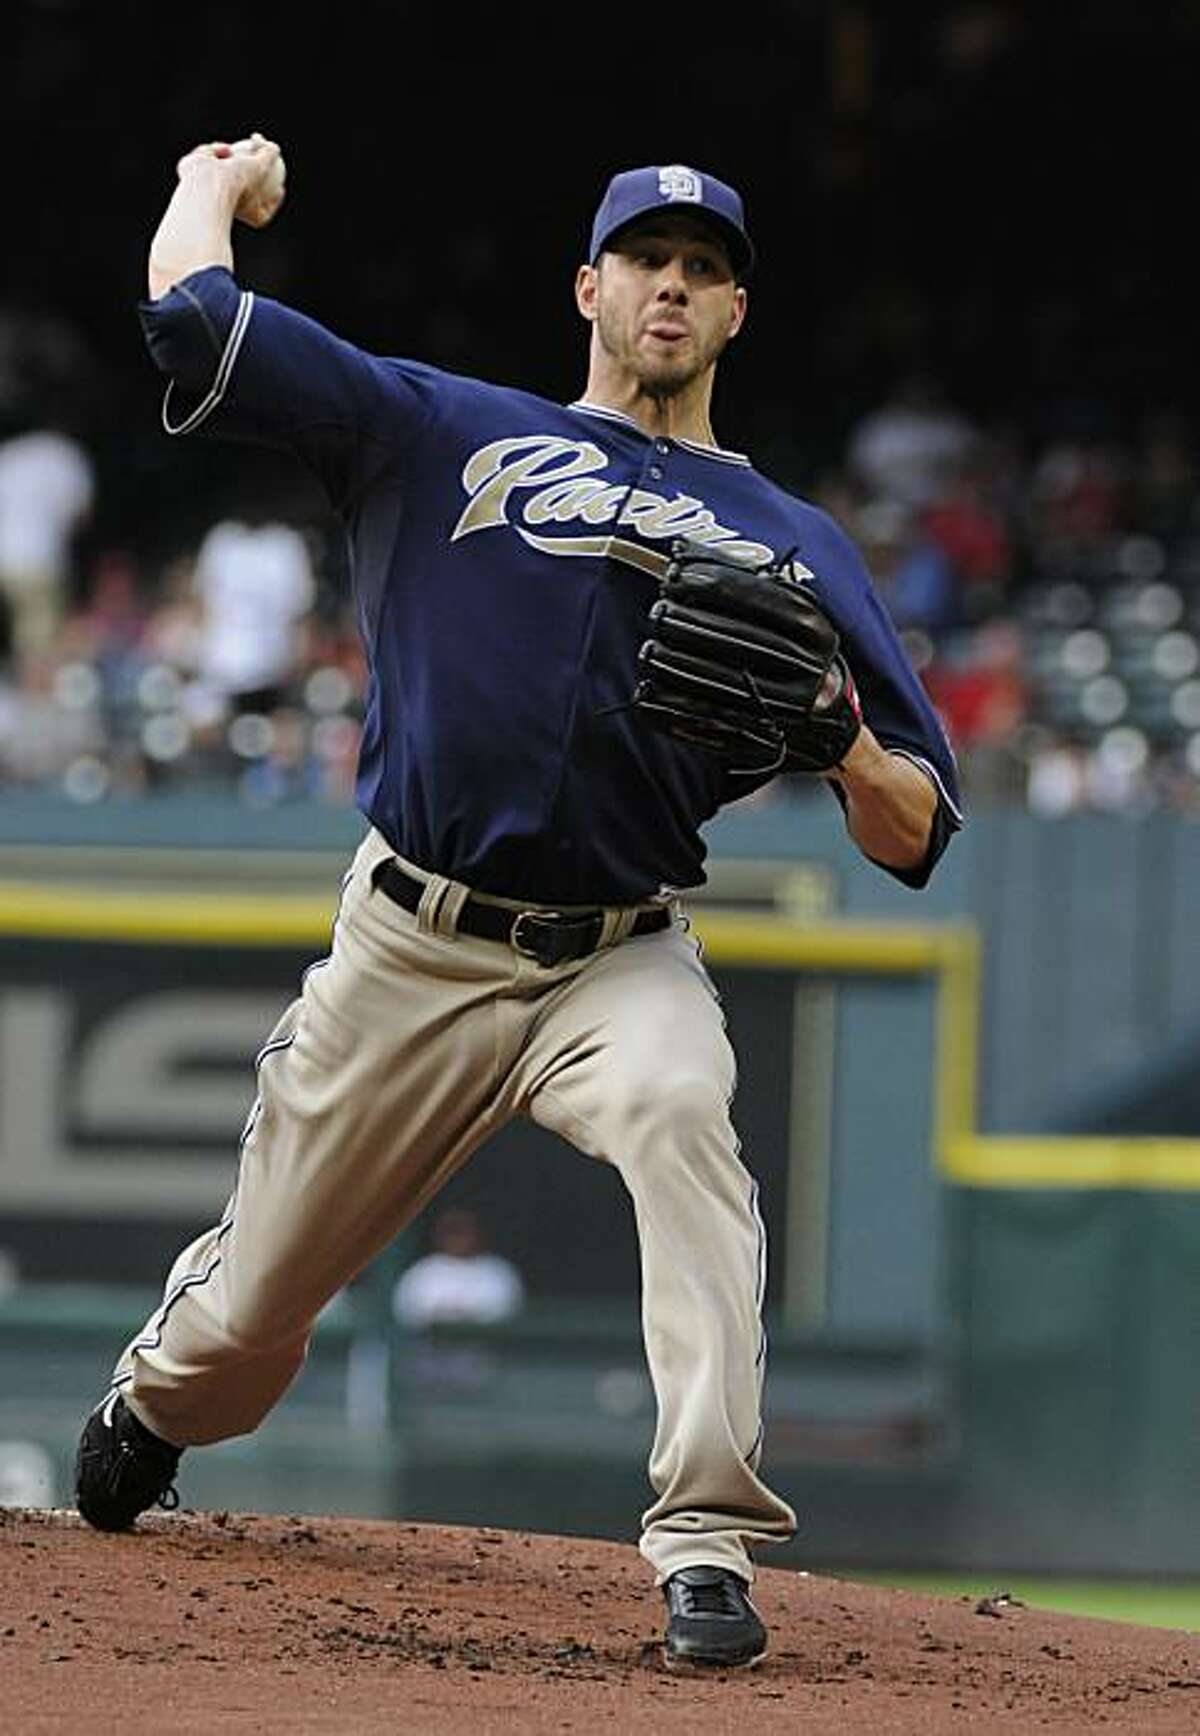 San Diego Padres' Jon Garland delivers a pitch in the first inning against the Houston Astros in a baseball game Saturday, May 8, 2010, in Houston.